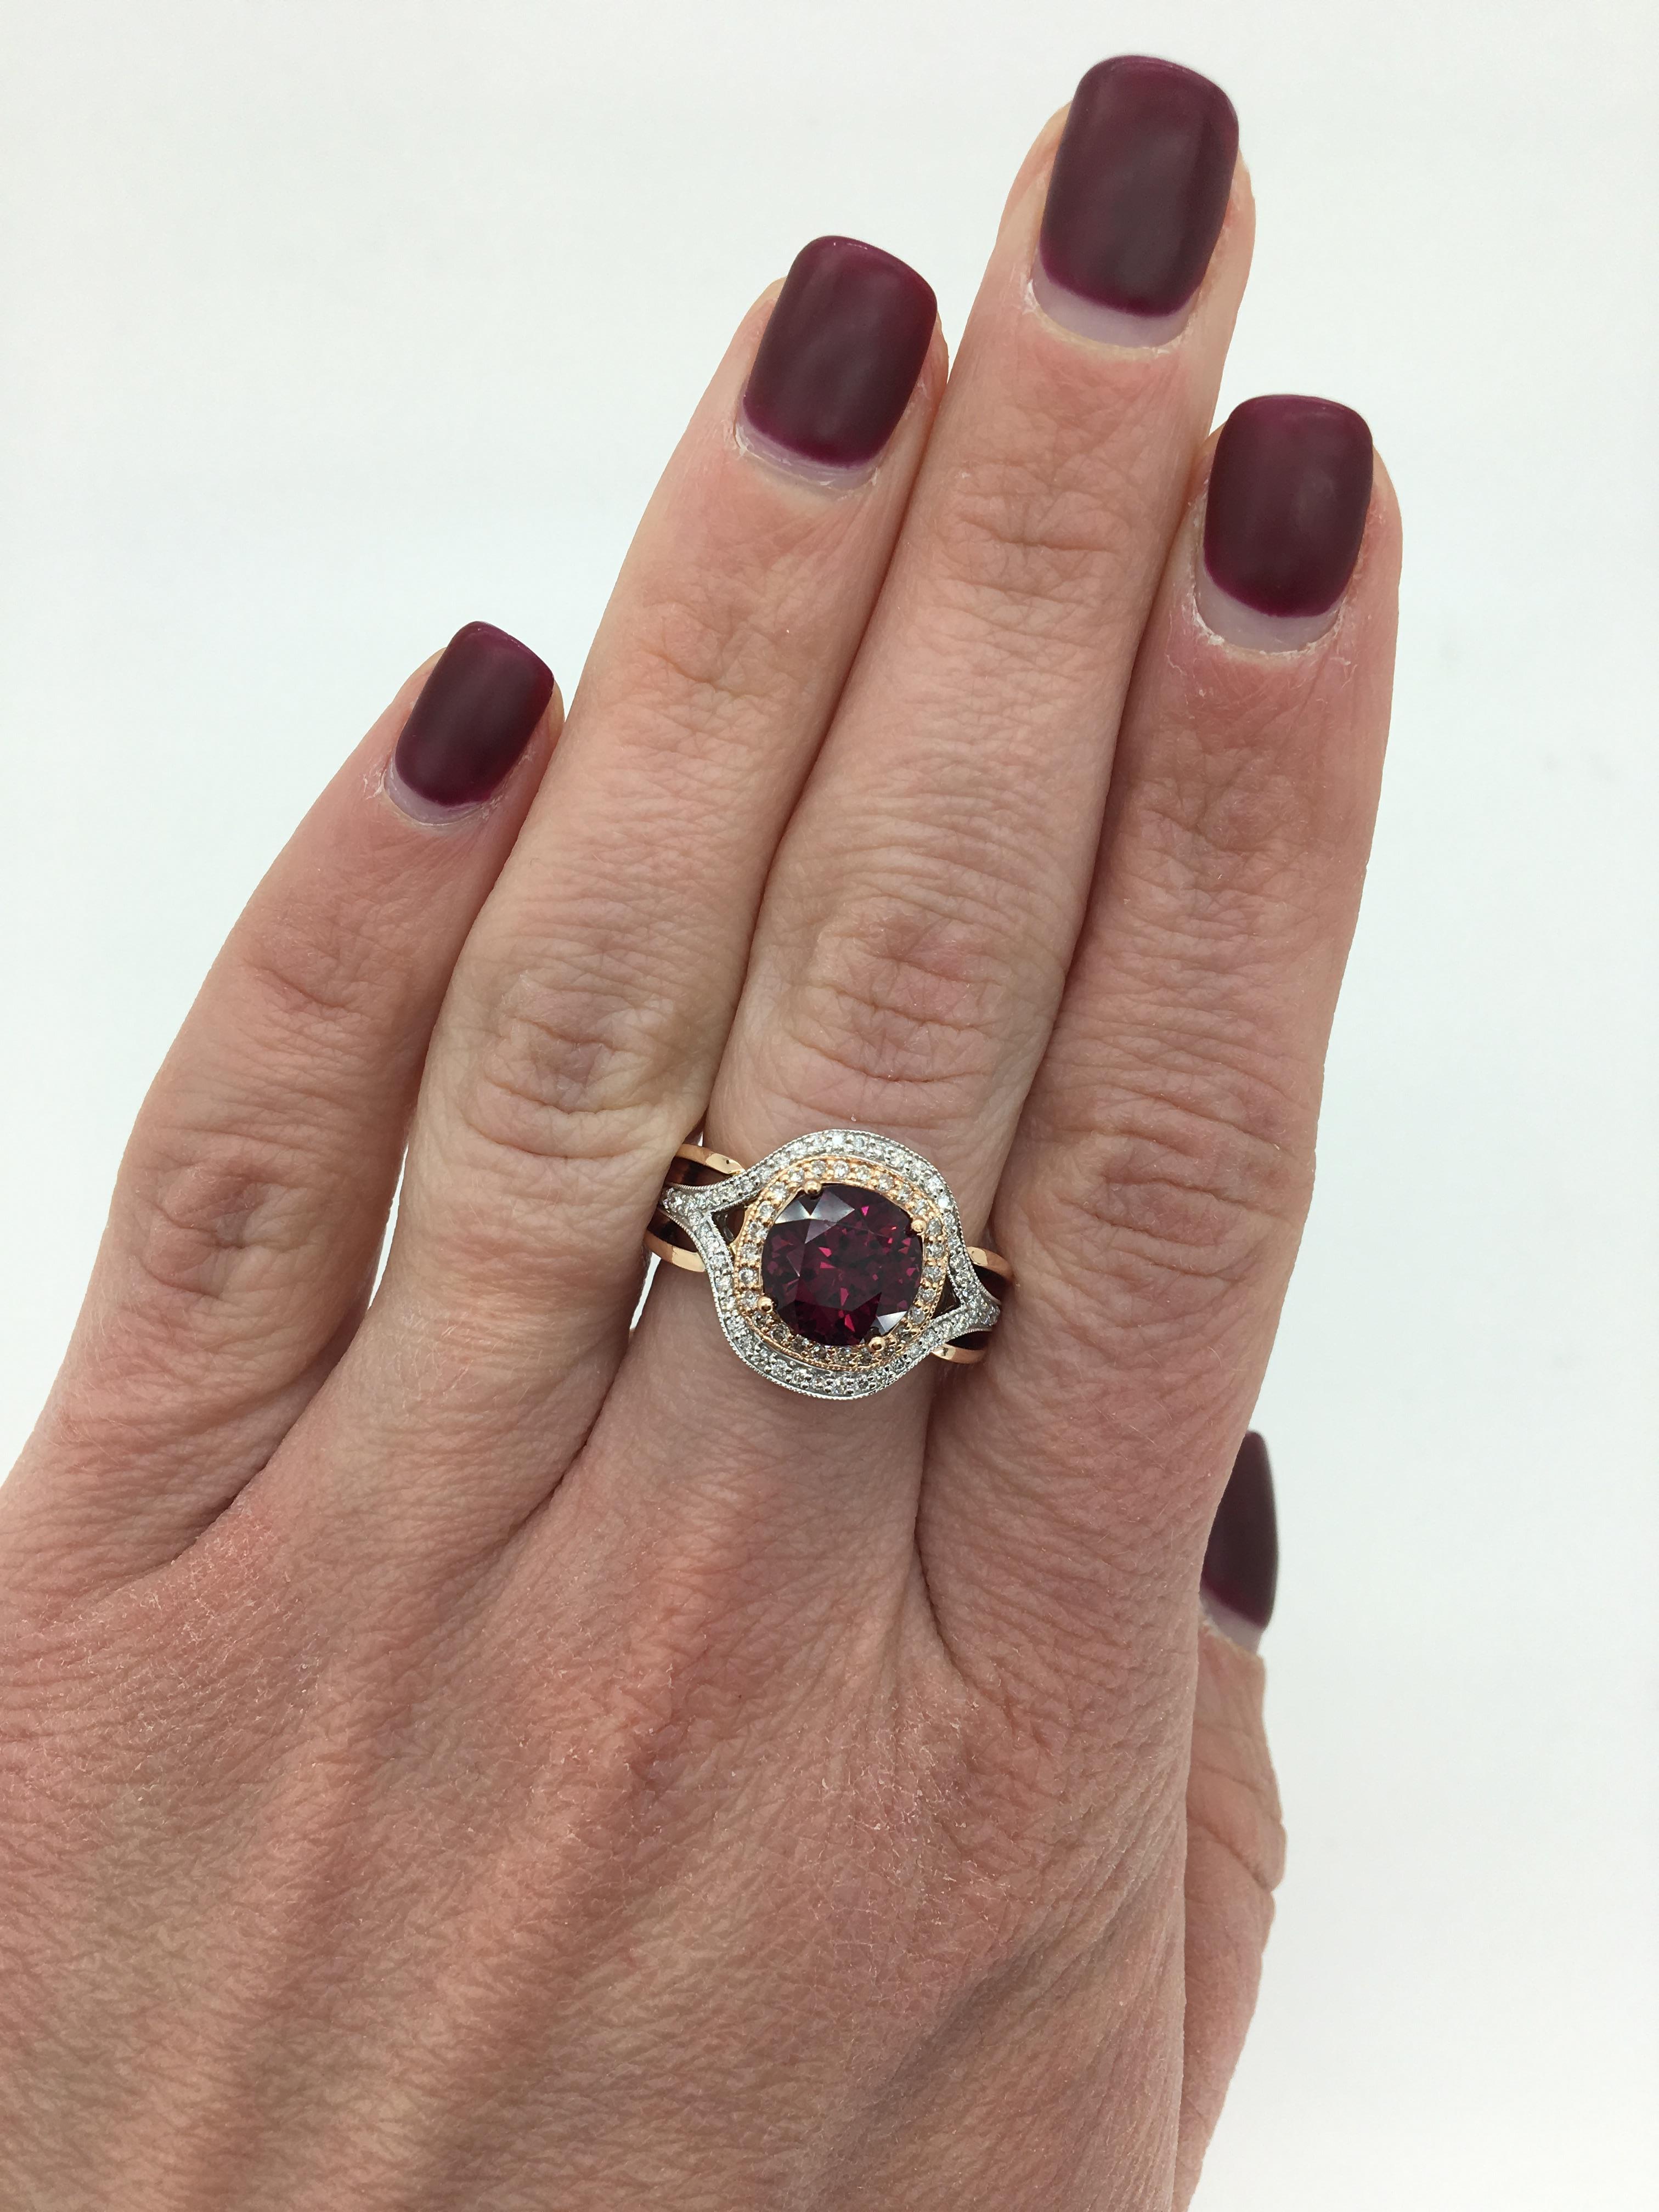 14K two tone rose and white gold cocktail ring featuring a stunning 3.29CT round cut Rhodolite Garnet surrounded by an elegant halo of round brilliant cut diamonds.

Gemstone: Round Cut Rhodolite Garnet
Gemstone Size: 3.29CT
Accent Diamonds: Round